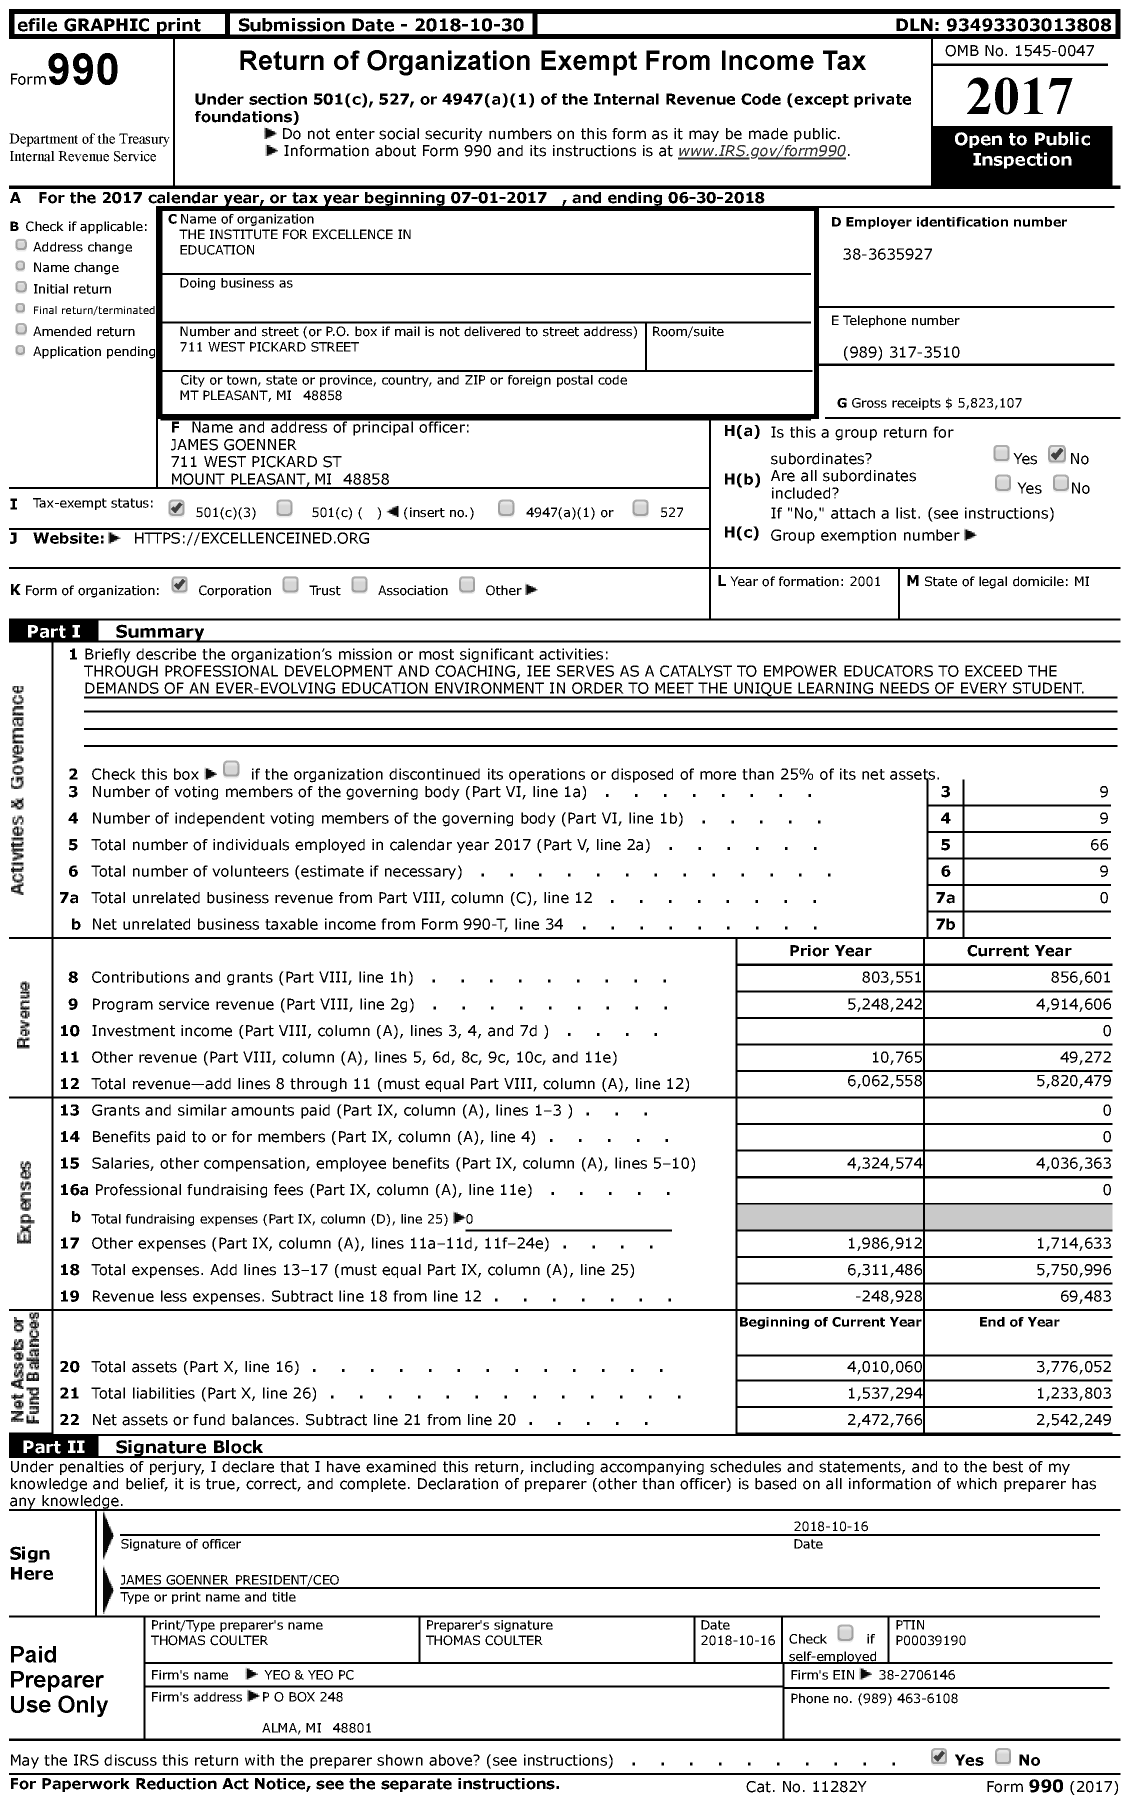 Image of first page of 2017 Form 990 for The Institute for Excellence in Education